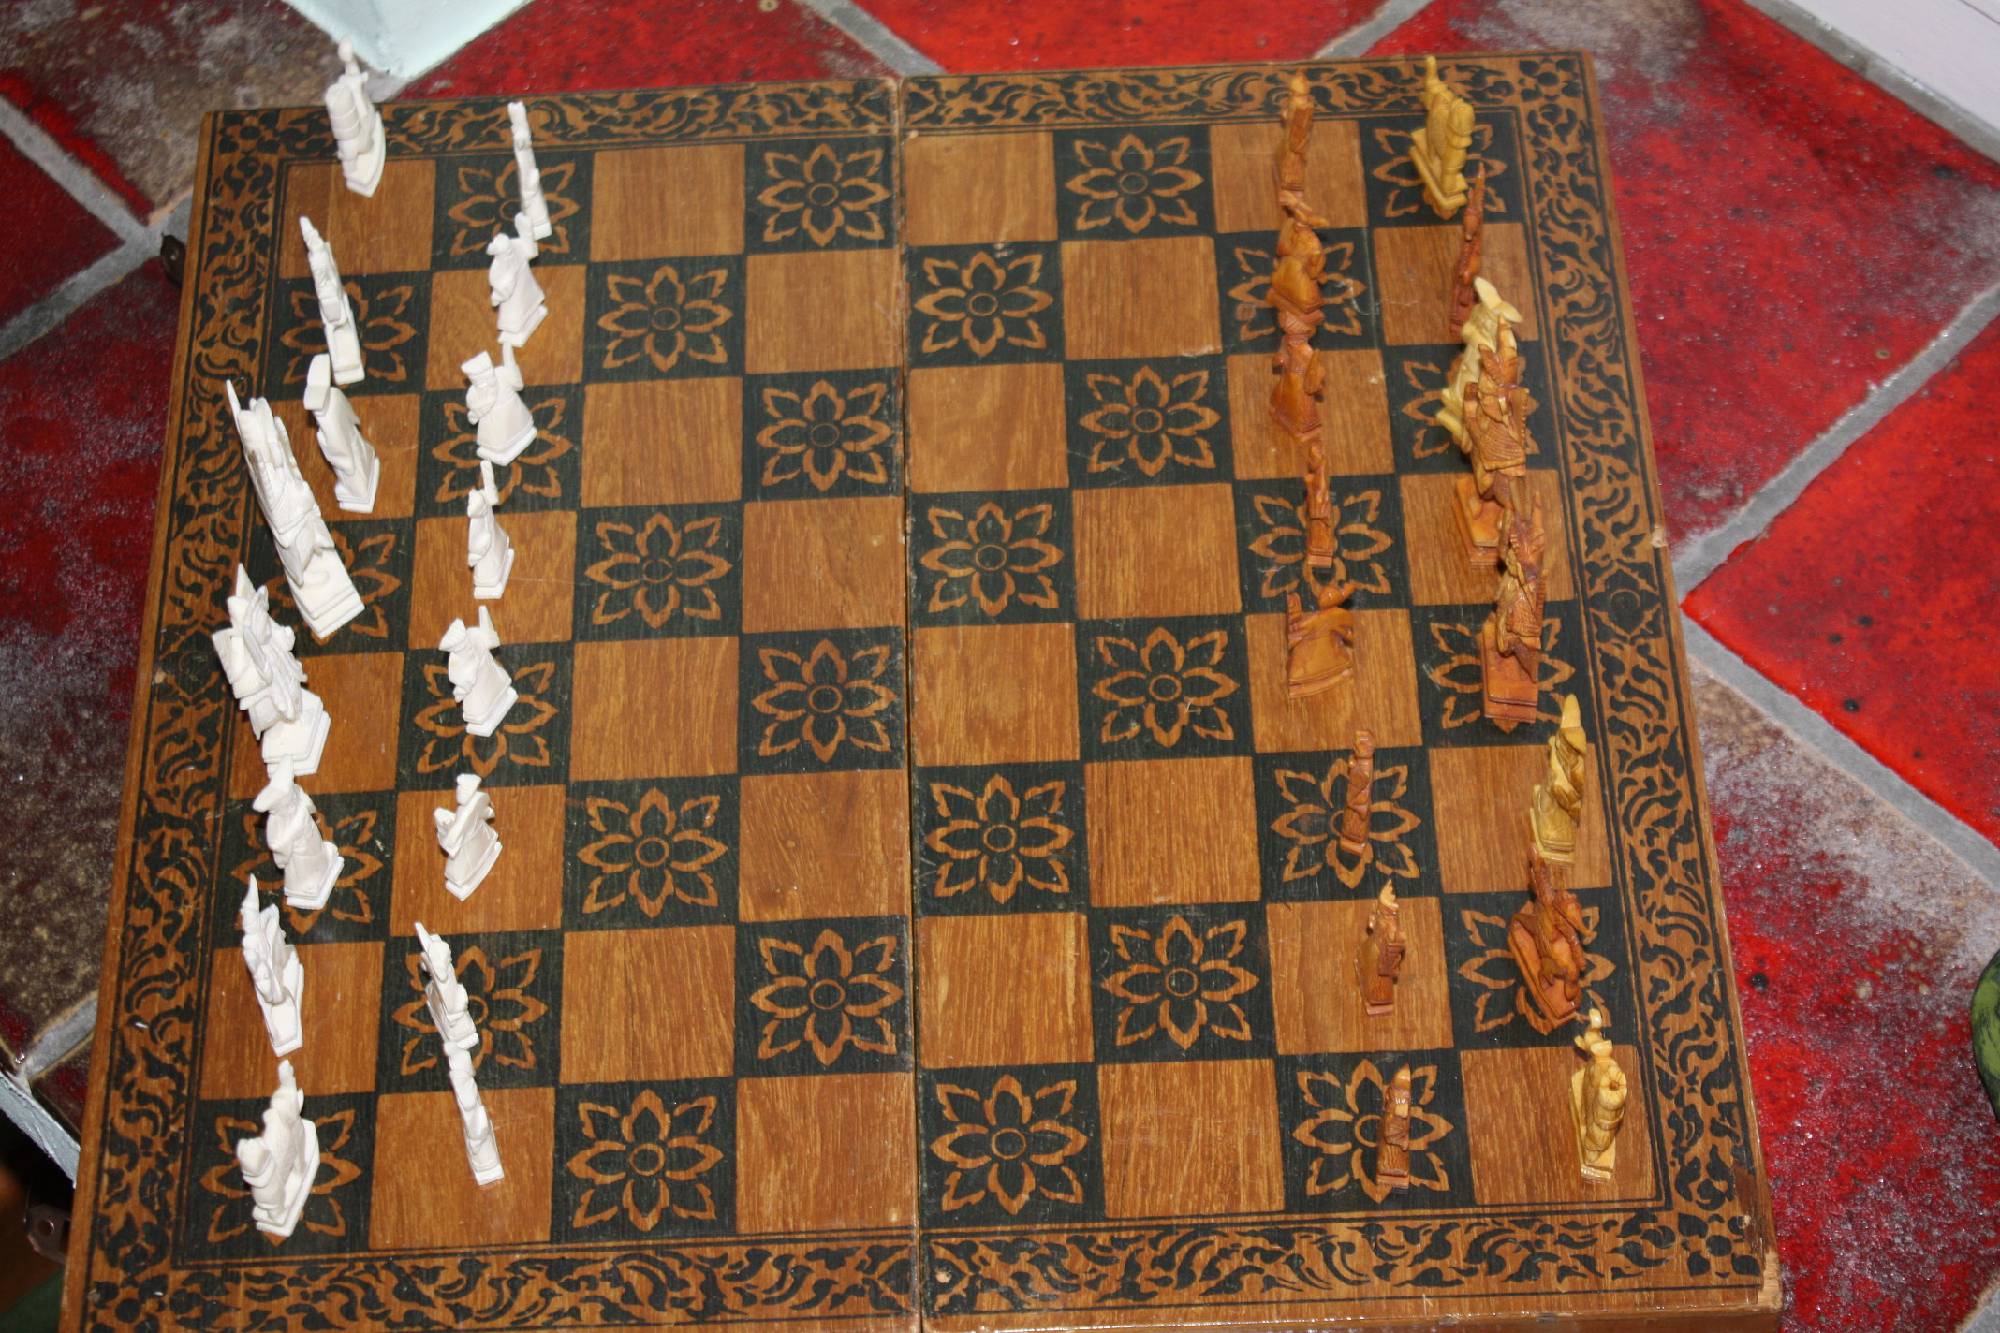 A 1930's Chinese handcarved ivory chess game with a wooden case serves as a fold-up playing board